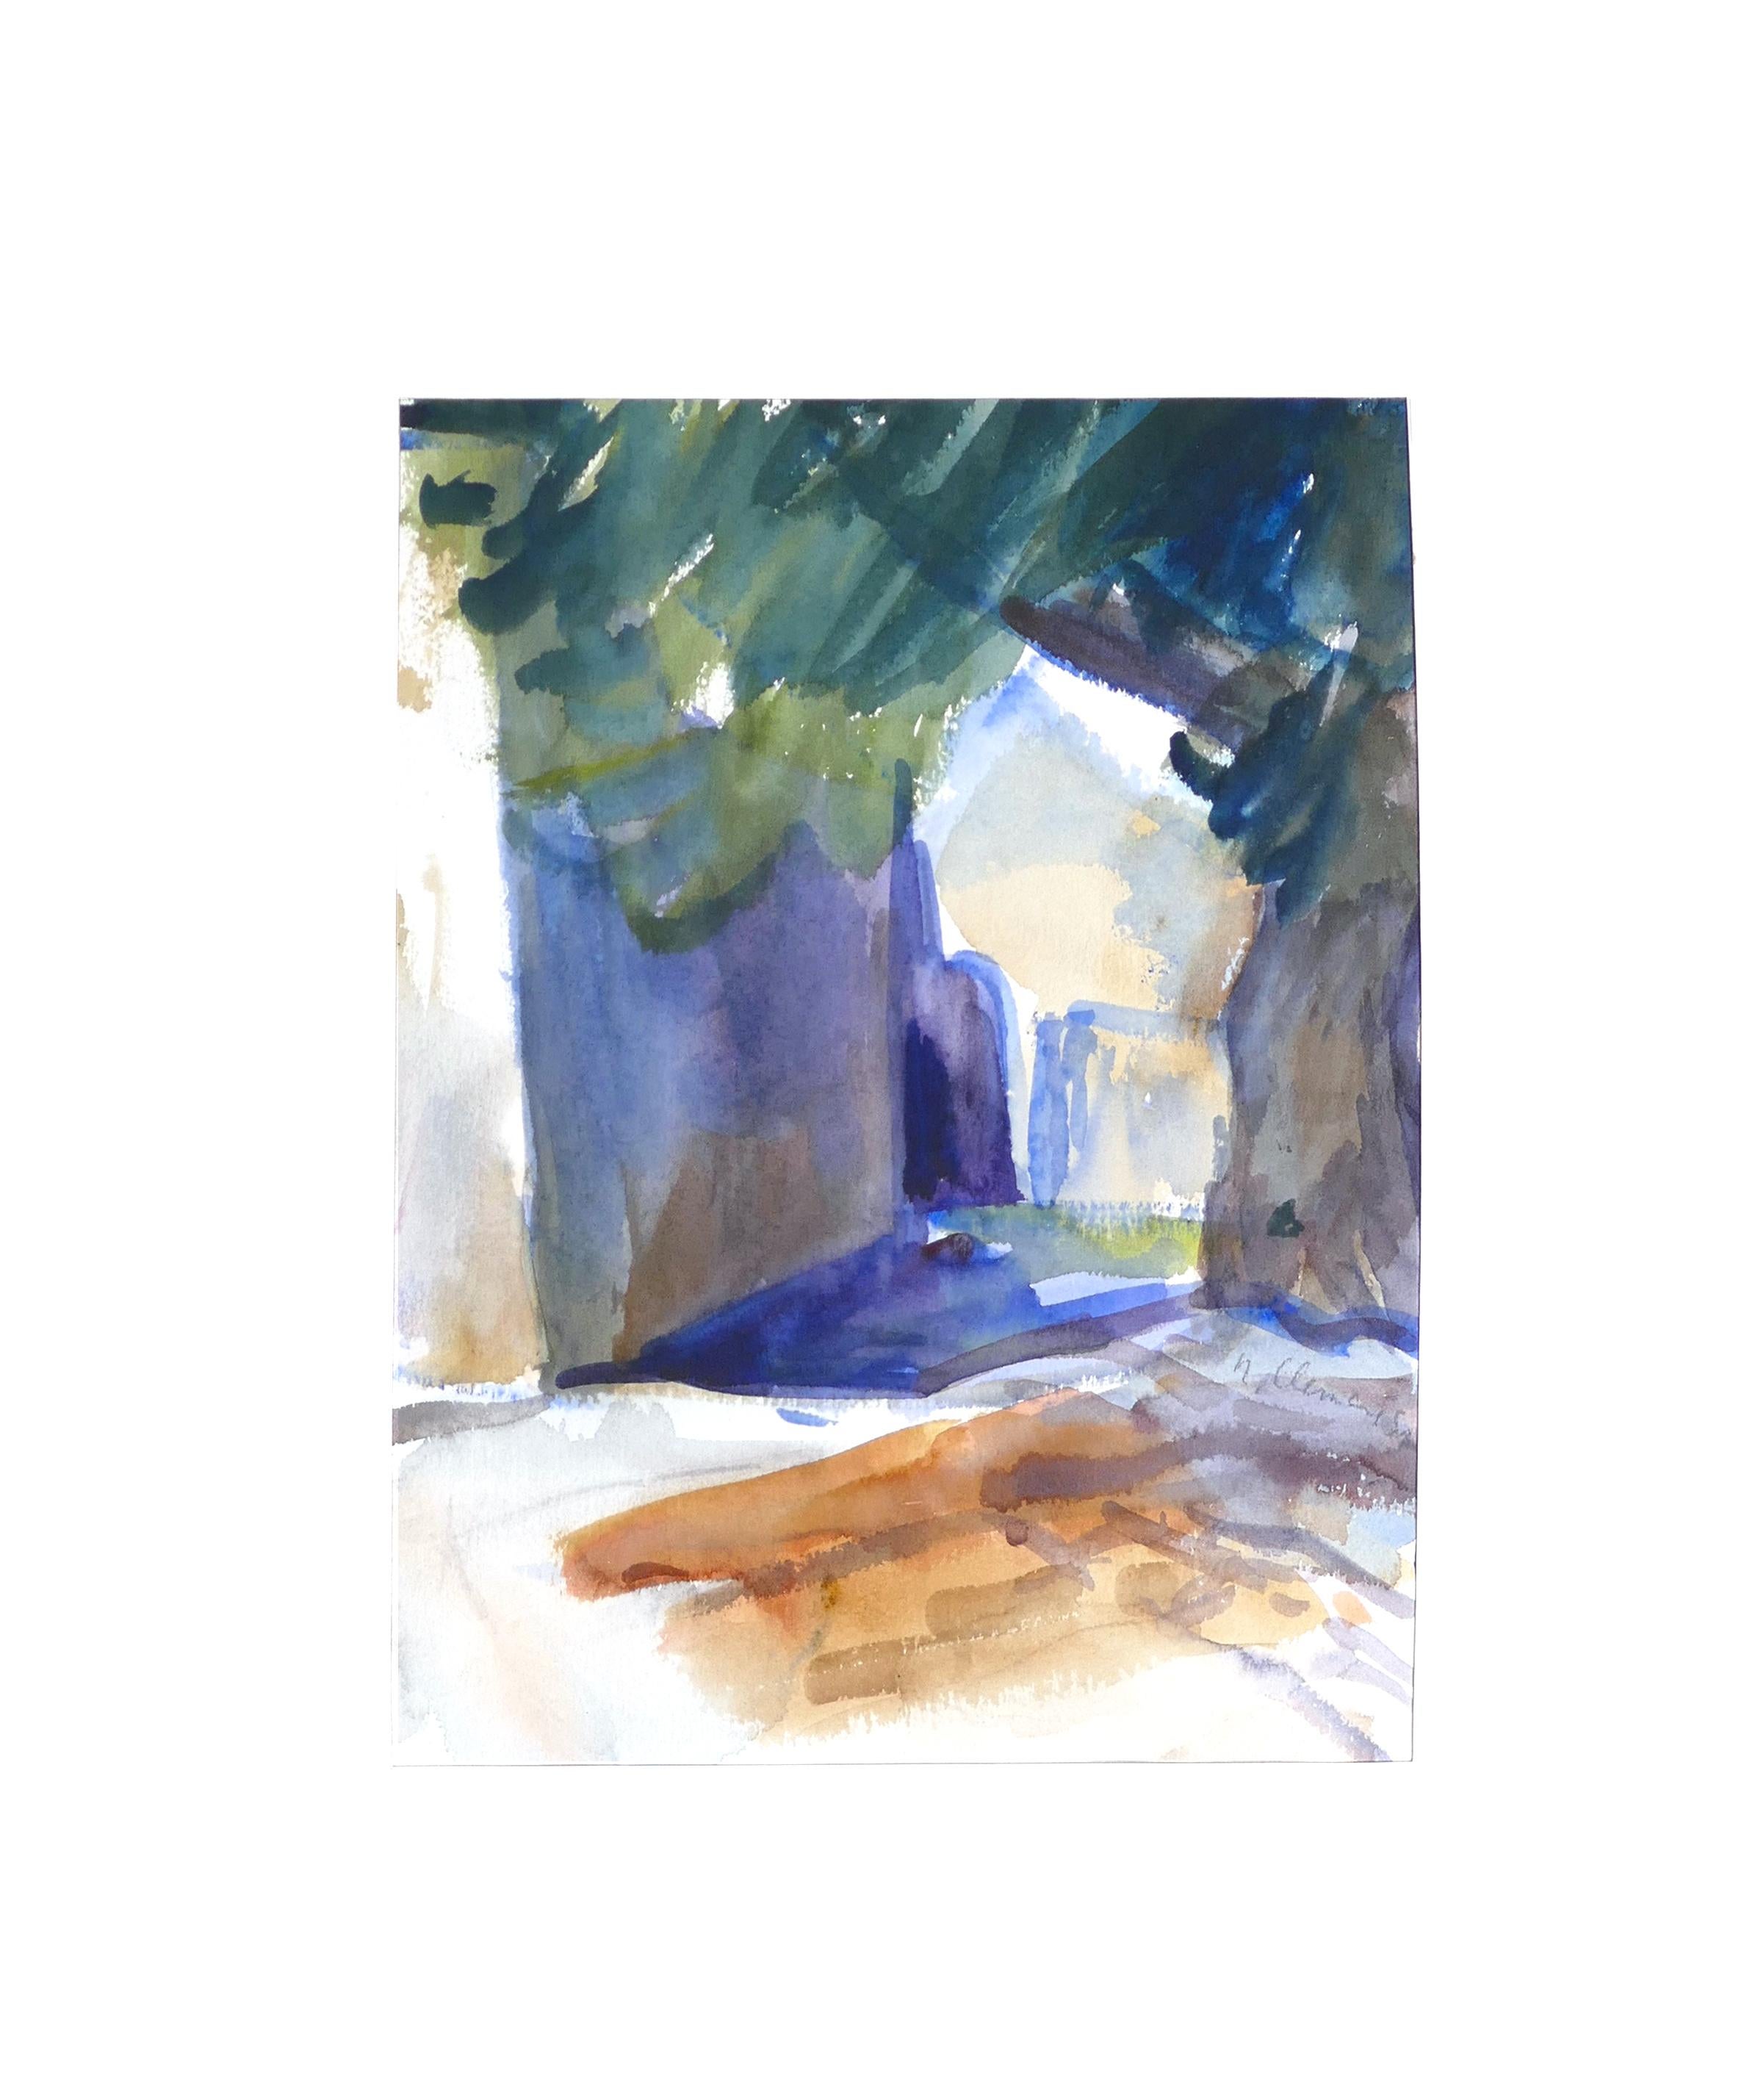 Shadow and Tree is an original watercolor on paper, realized between 1986 and 1988 by Armin Guther.

Very good condition. Including Passepartout (cm 50 x 60)

The artwork is hand-signed and dated on the lower right corner. 

This beautiful